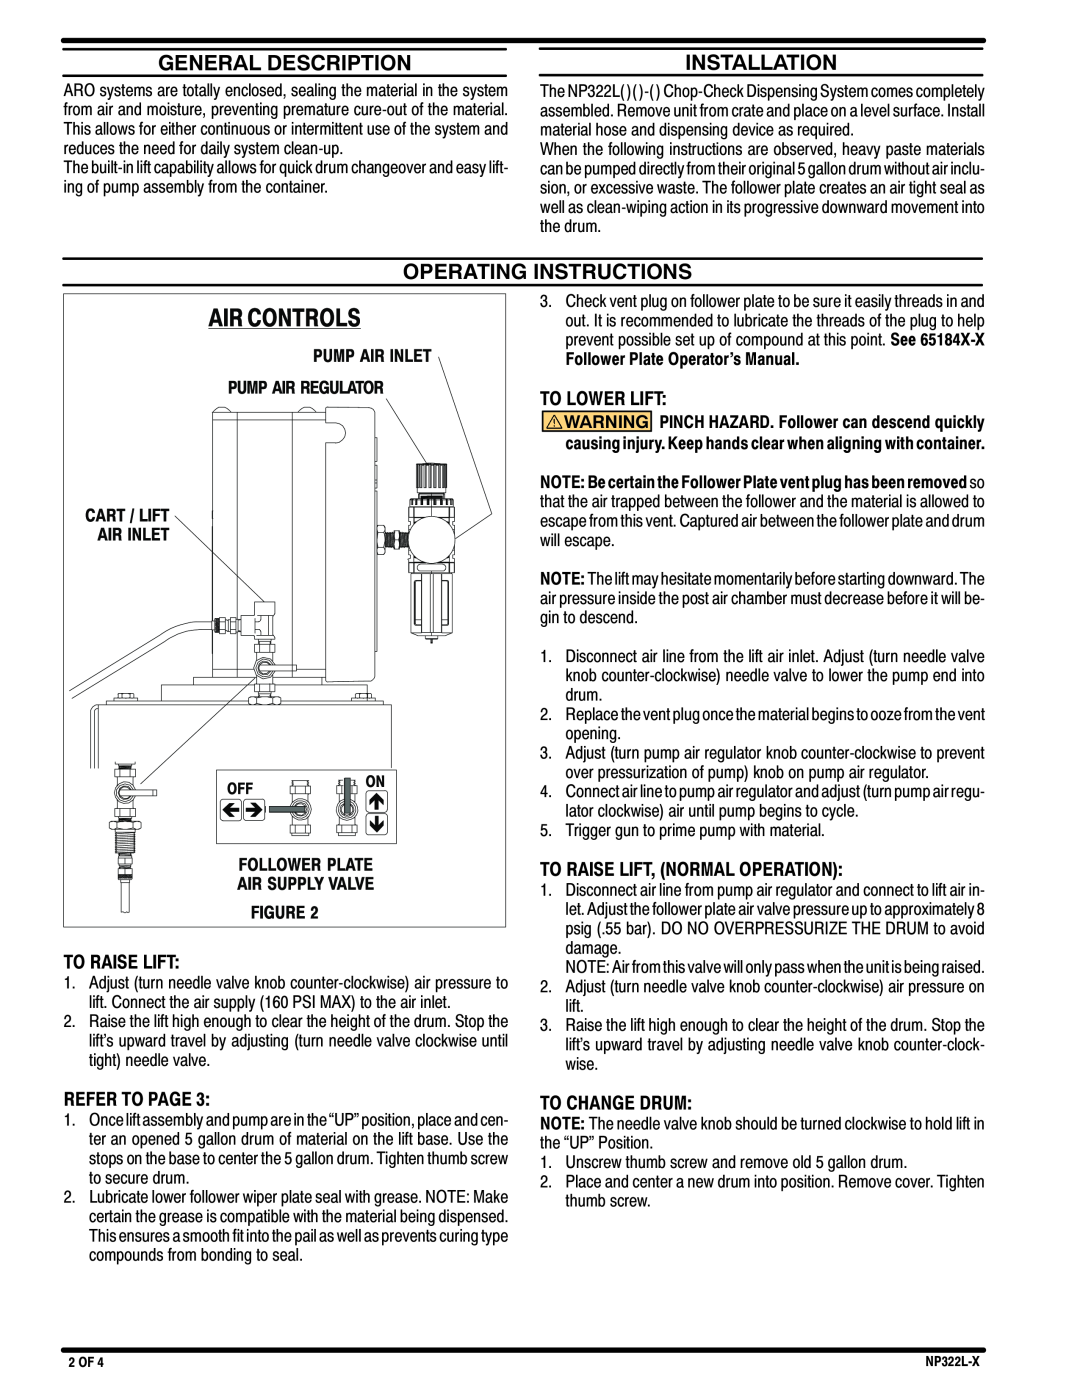 Ingersoll-Rand NP322L01-1 General Description, Installation, Operating Instructions, To Raise Lift, To Lower Lift 